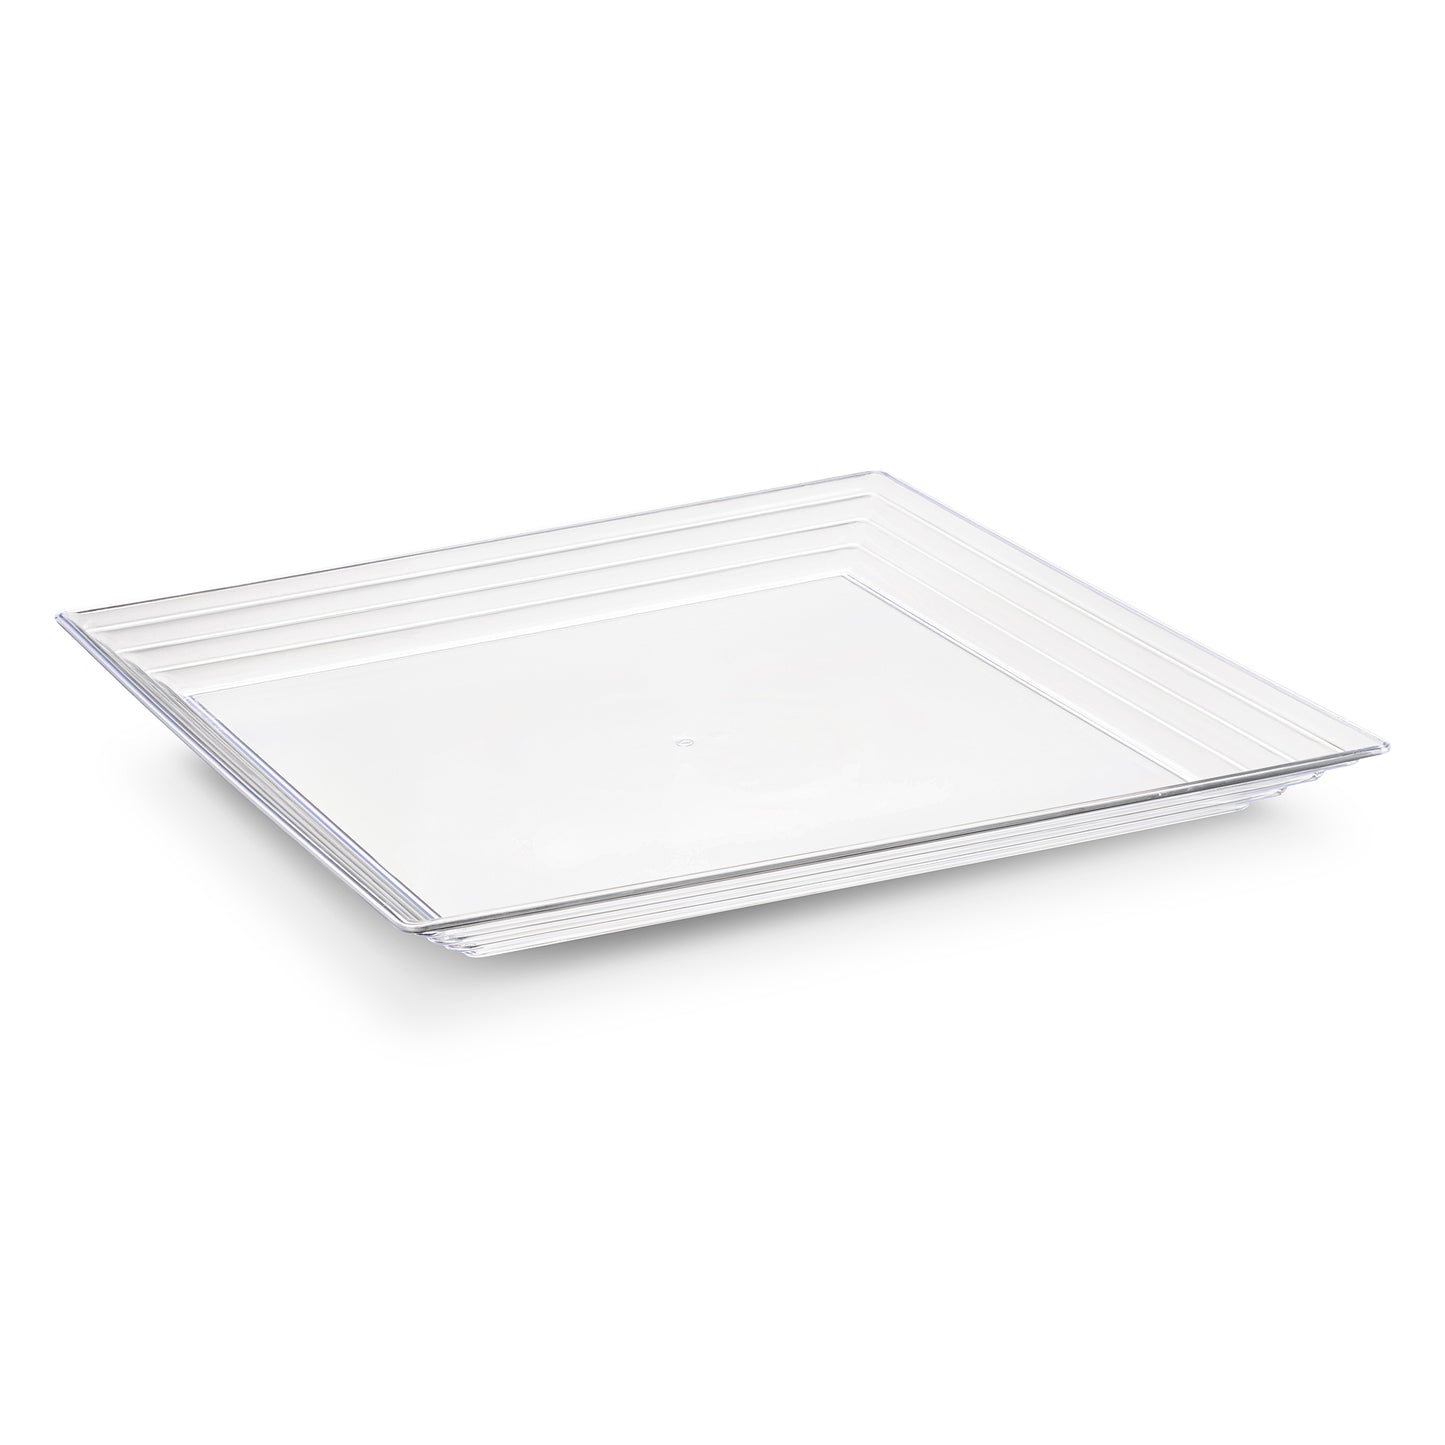 16" x 16" Clear Square with Groove Rim Disposable Plastic Serving Trays